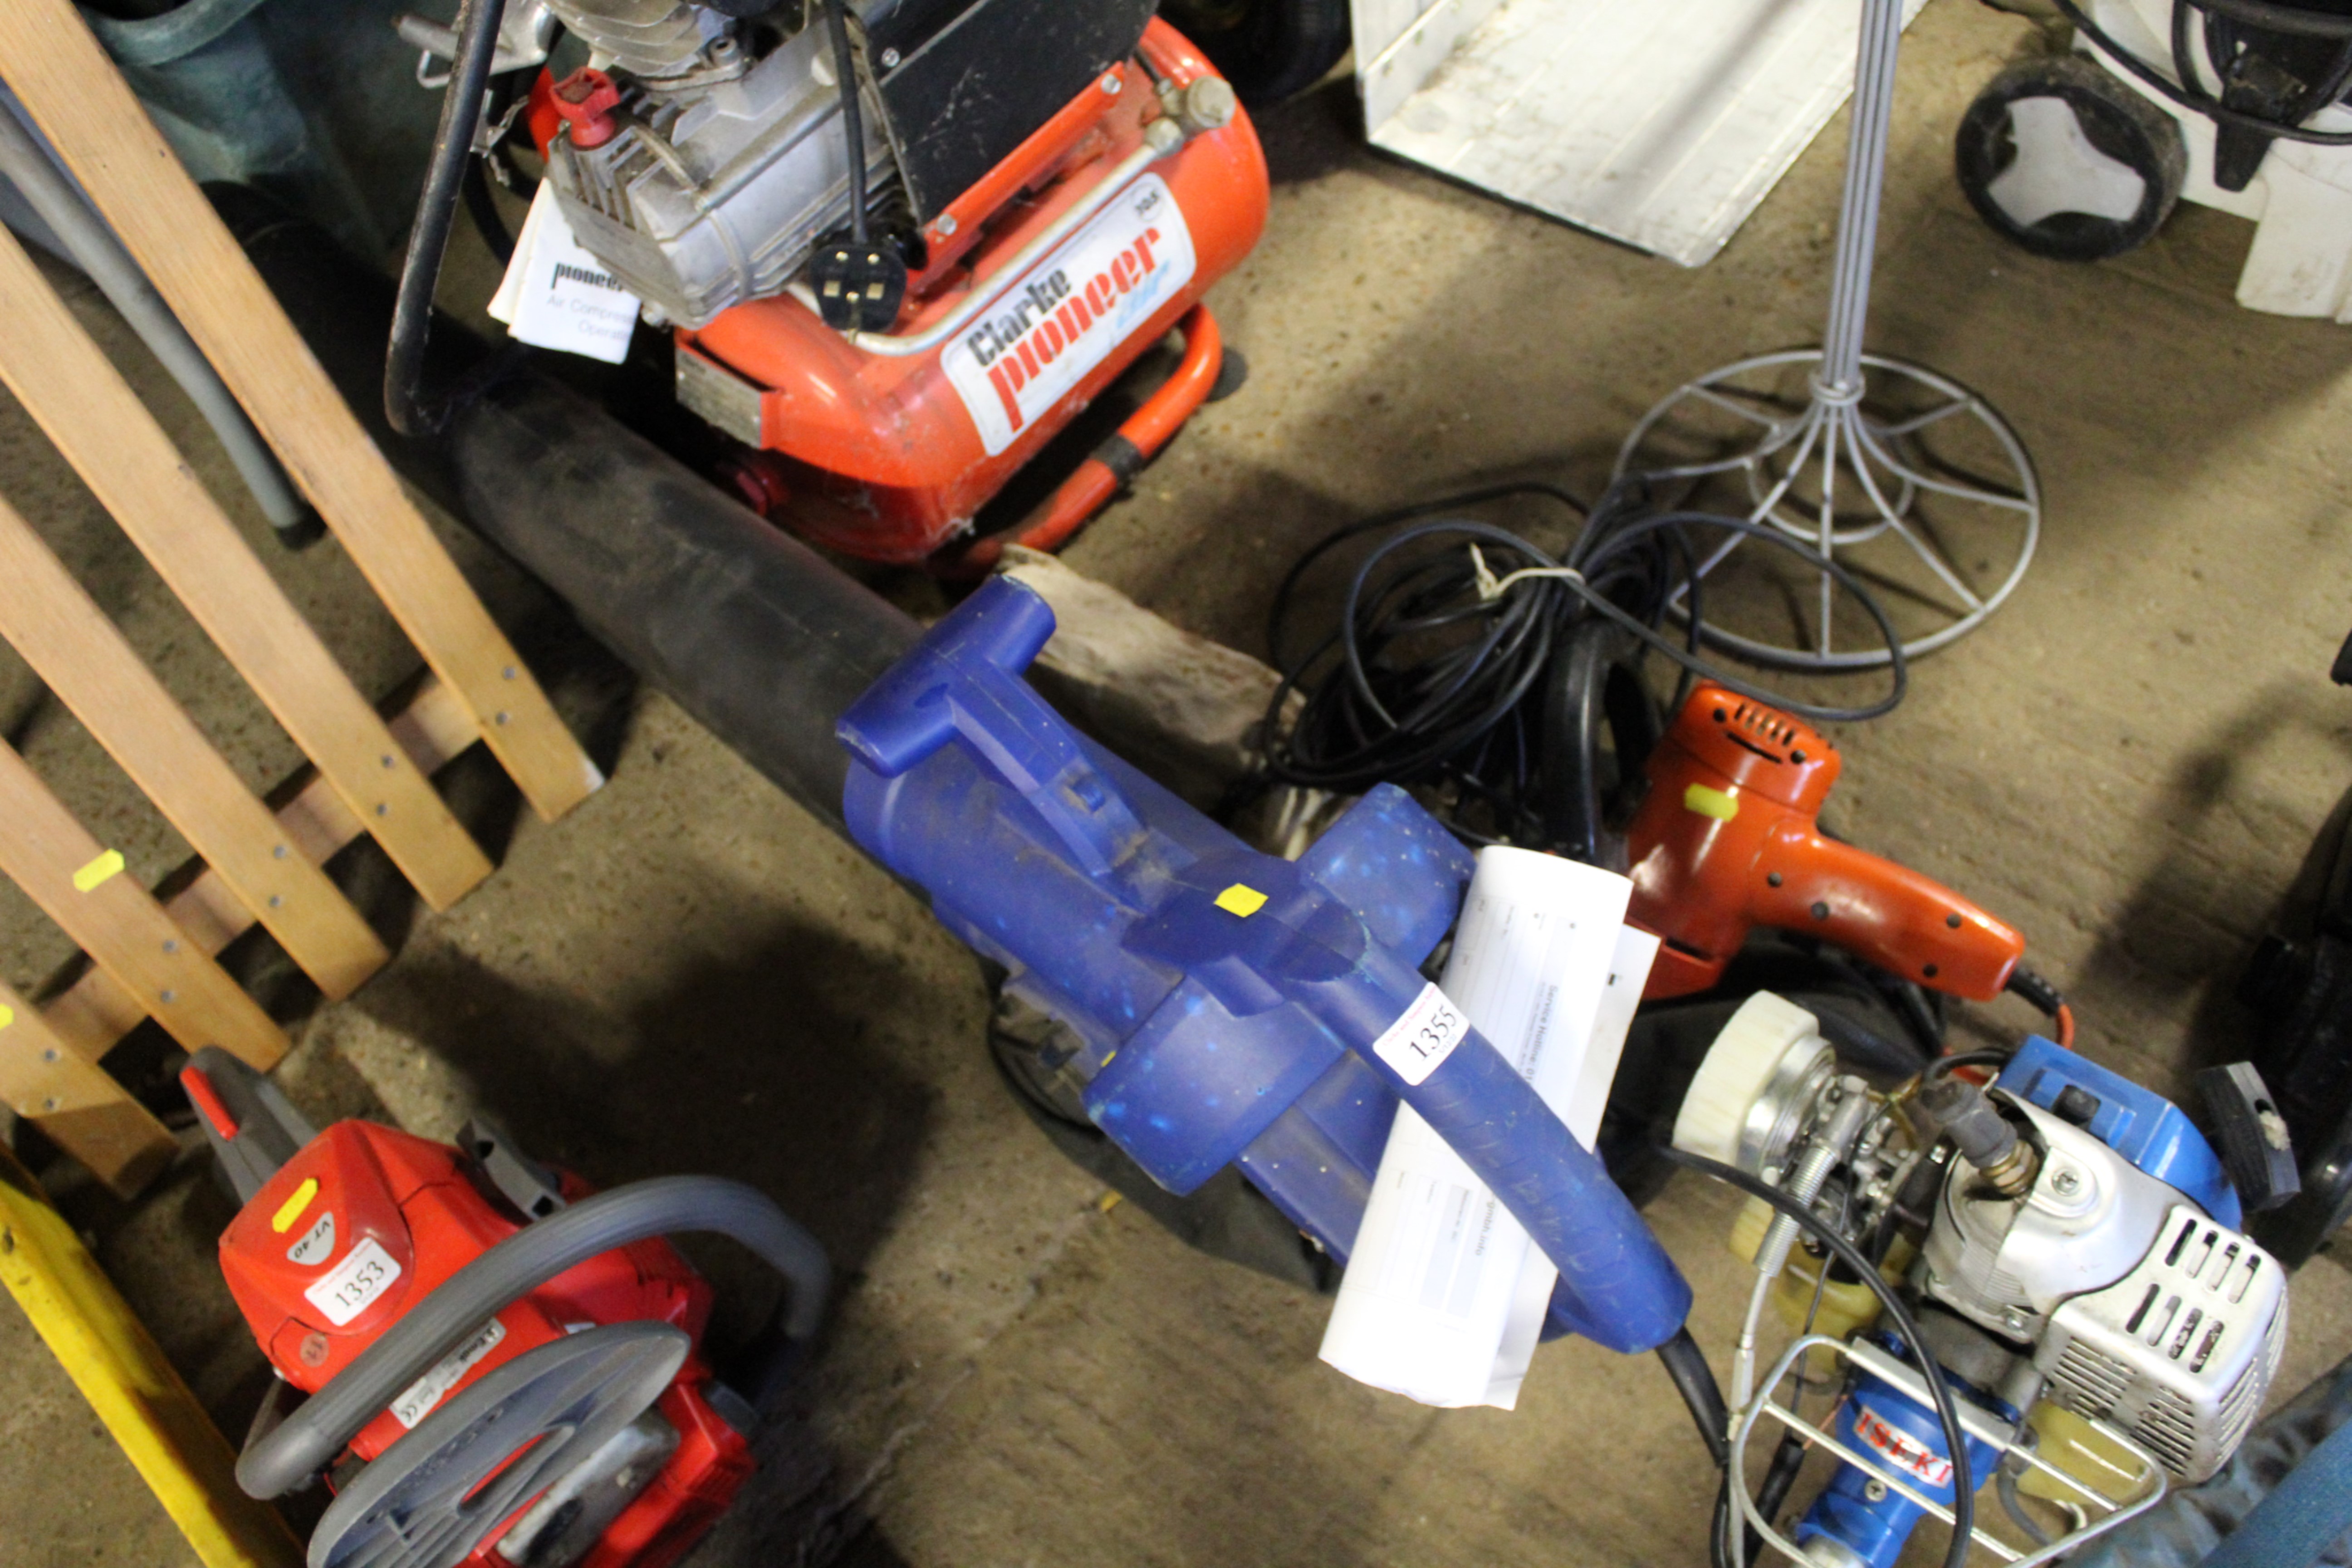 A Einhell garden blower/vac and a small electric h